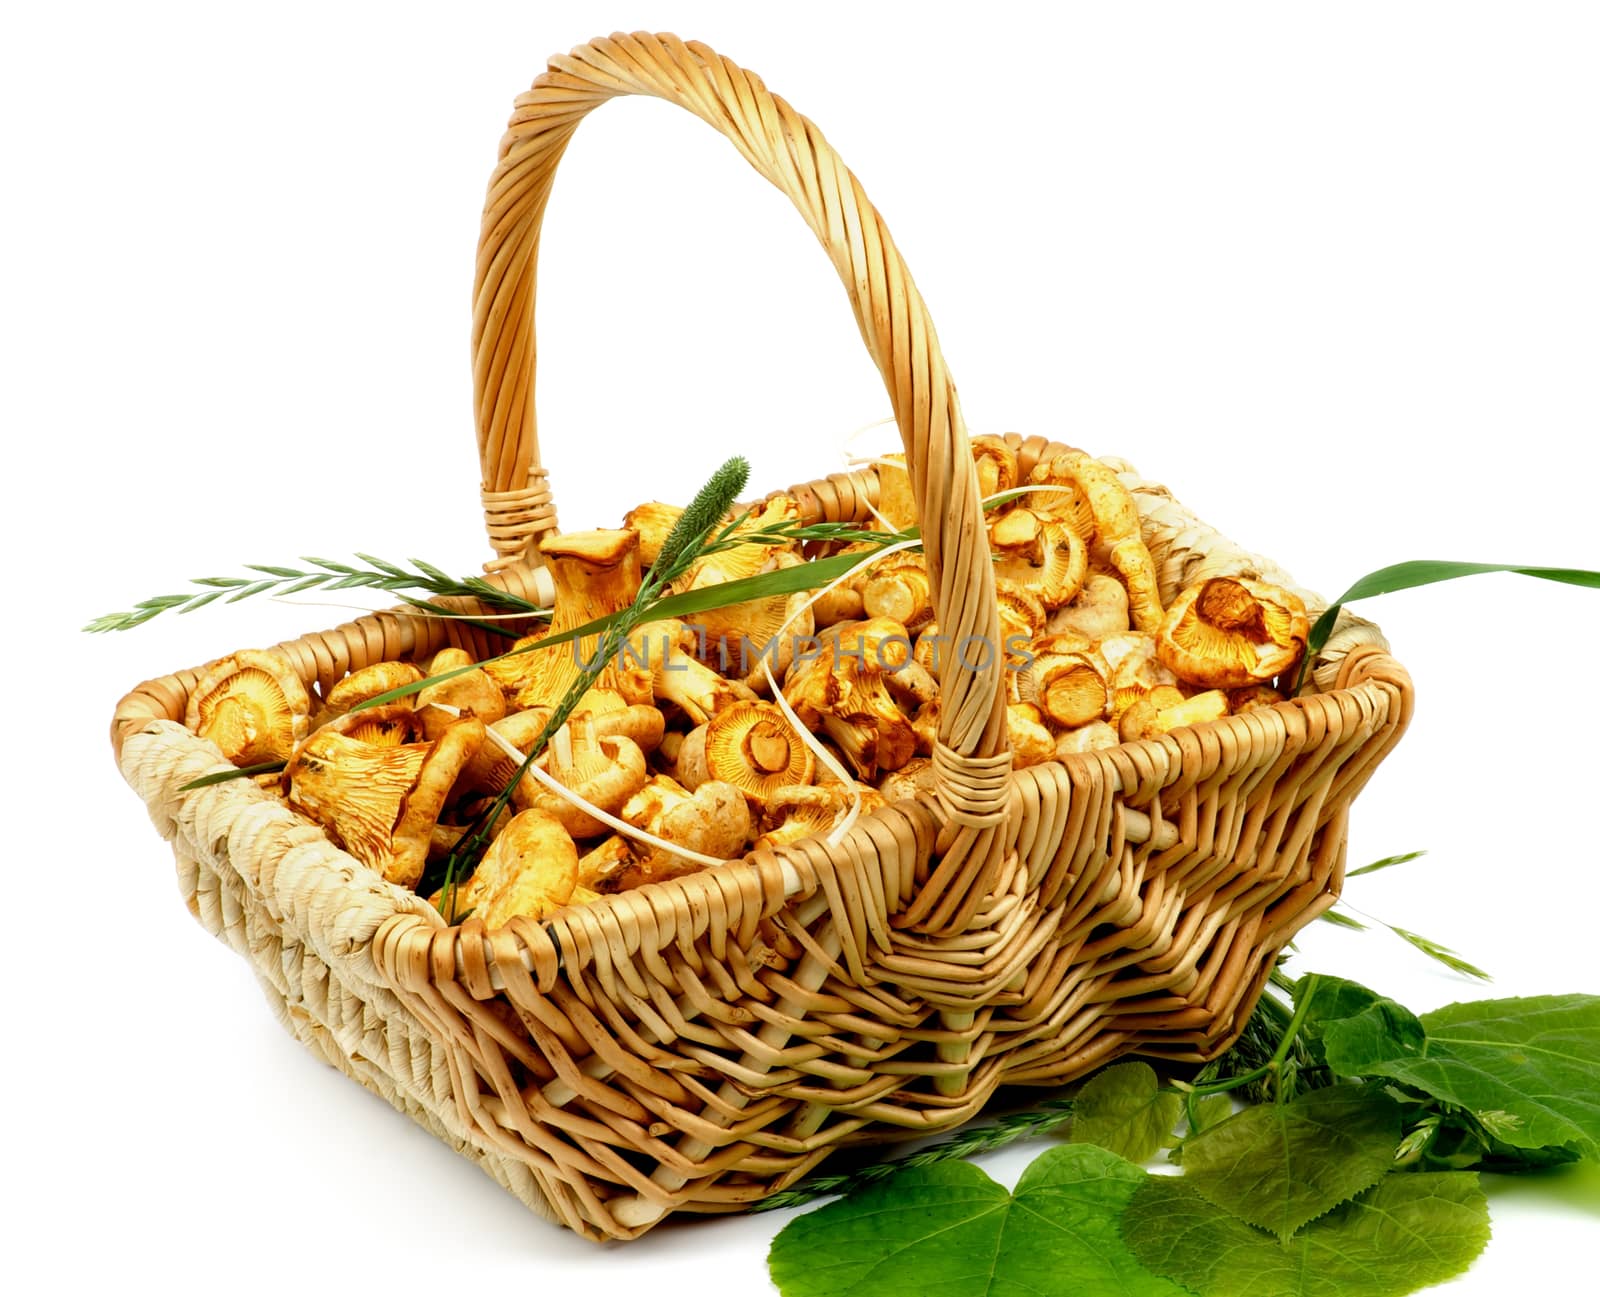 Perfect Little Raw Chanterelles in Wicker Basket with Green Leafs and Grass isolated on White background